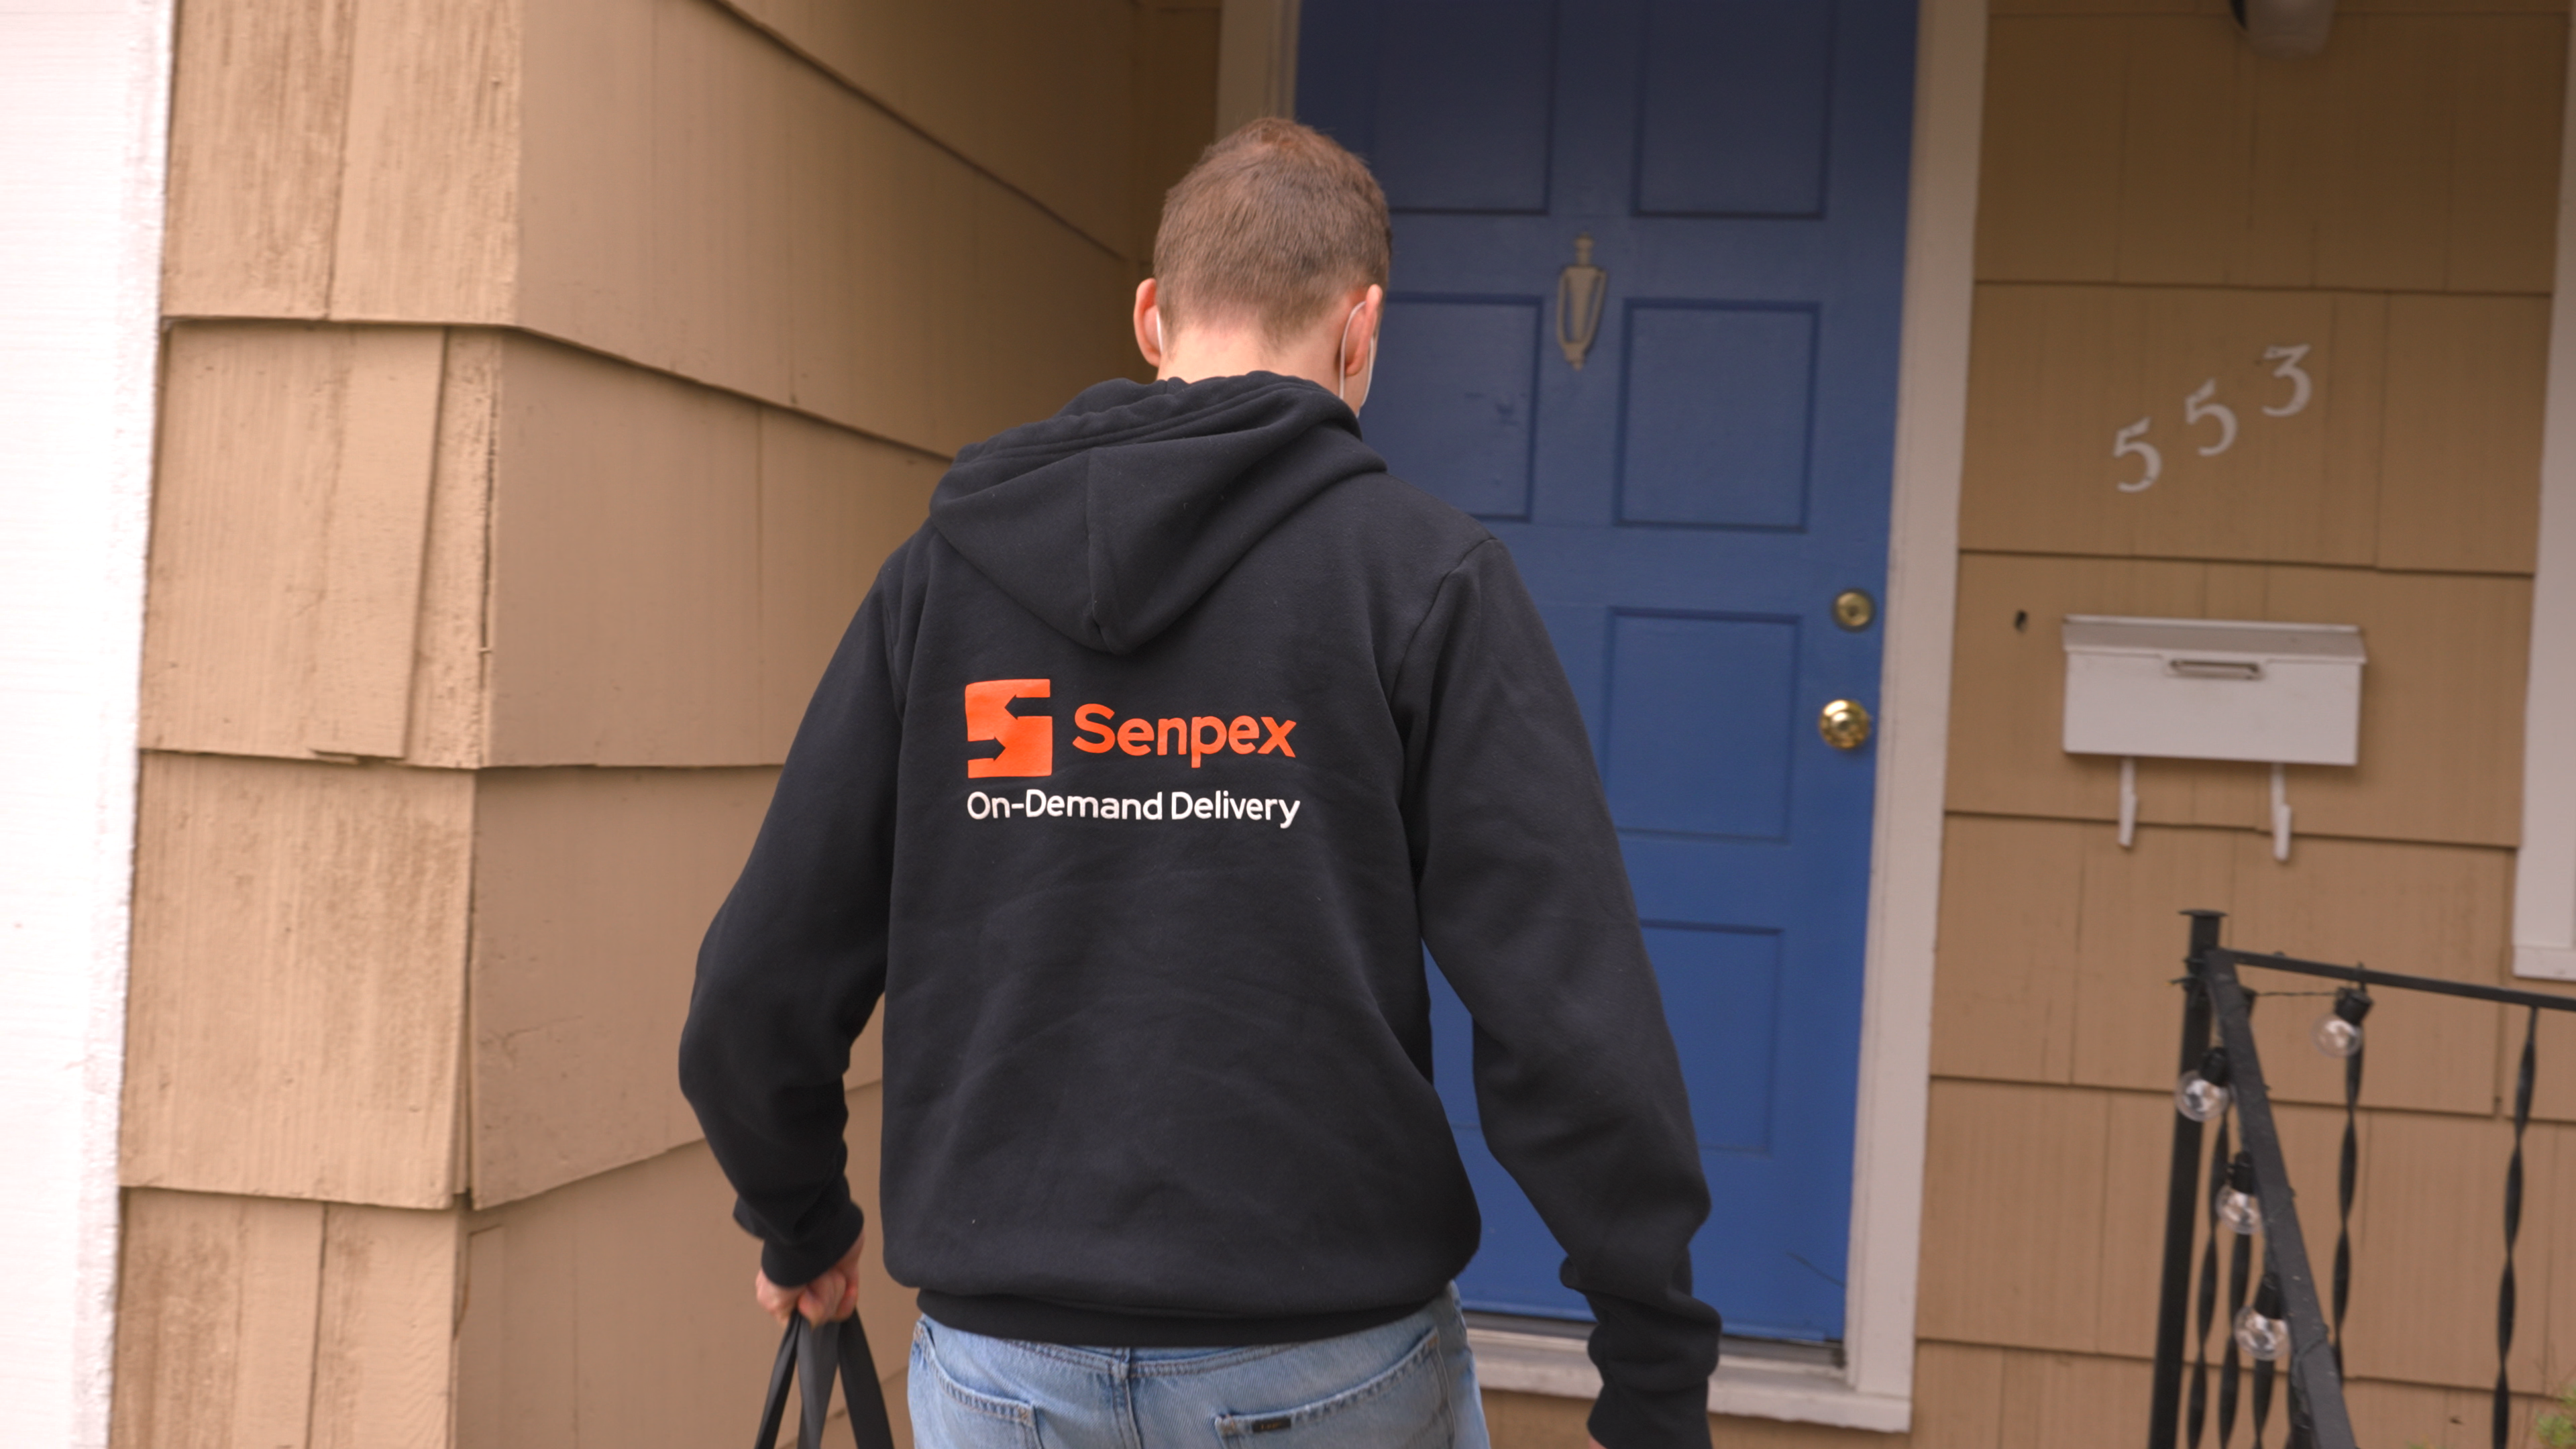 Senpex Technology Launches Logistics Feature "Senpex Flex" Allowing Organizations to Partner With Dedicated Drivers